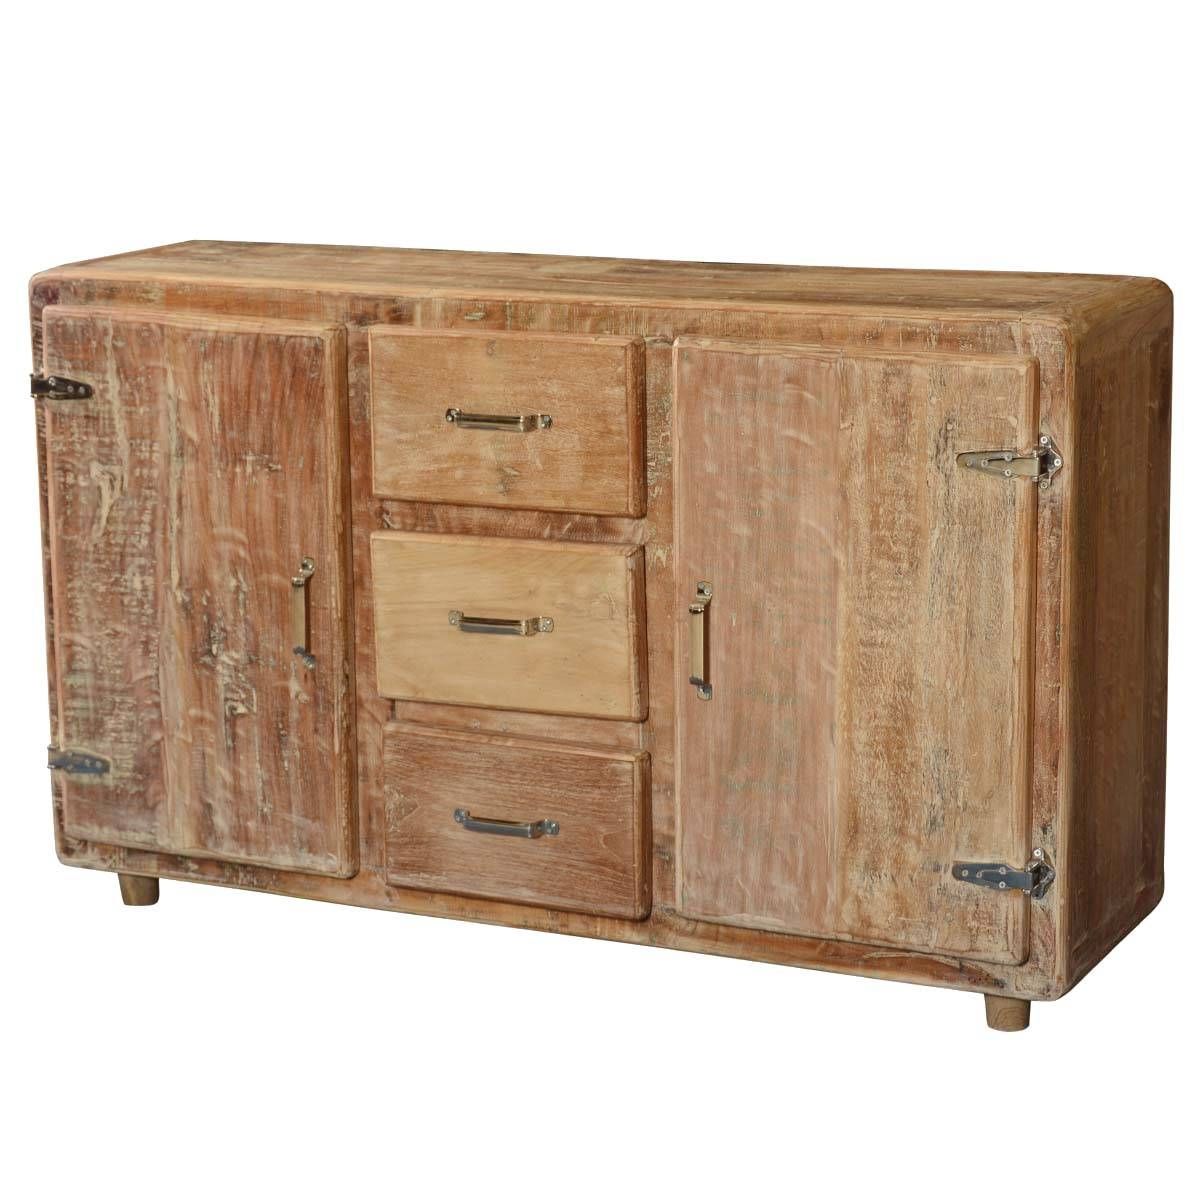 Rounded Corners Reclaimed Wood 3 Drawer Rustic Sideboard For 2018 Reclaimed Wood Sideboards (View 4 of 15)